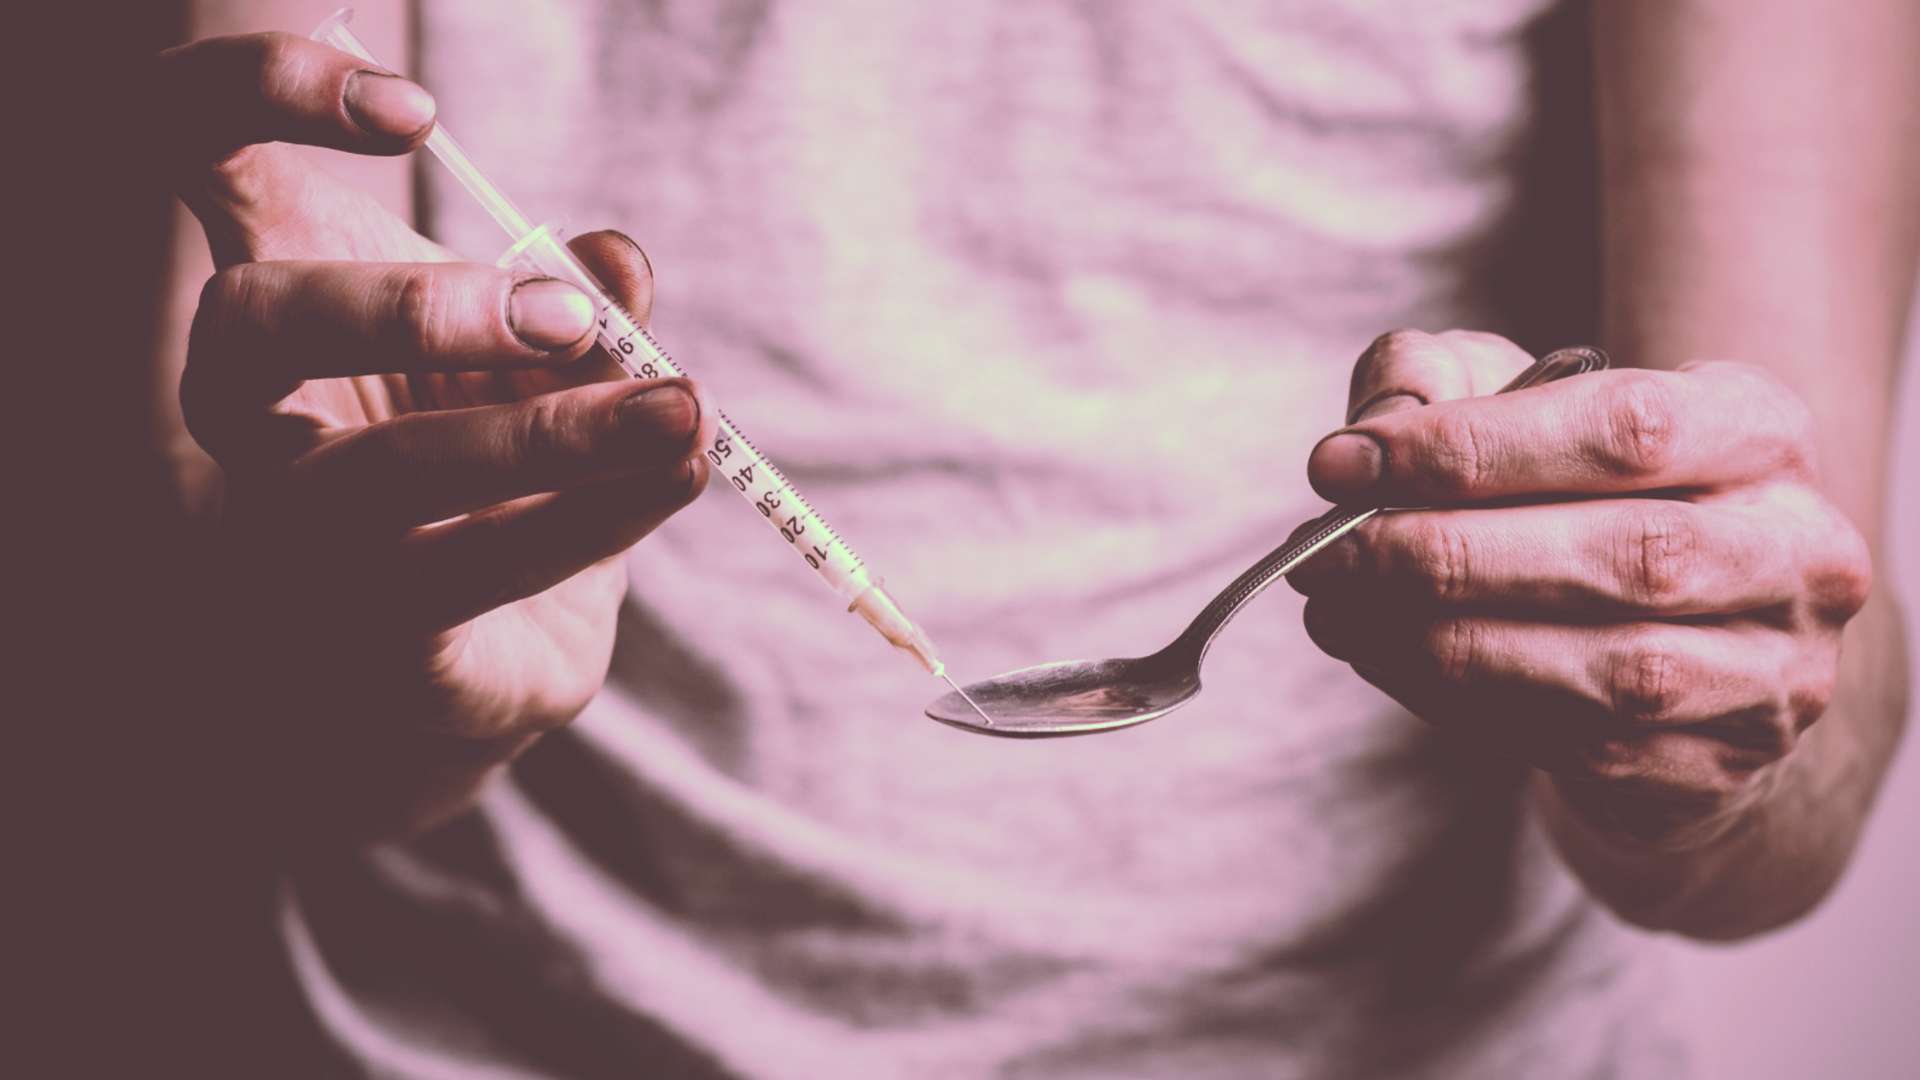 What Happens when You Use Heroin: Risks and Effects